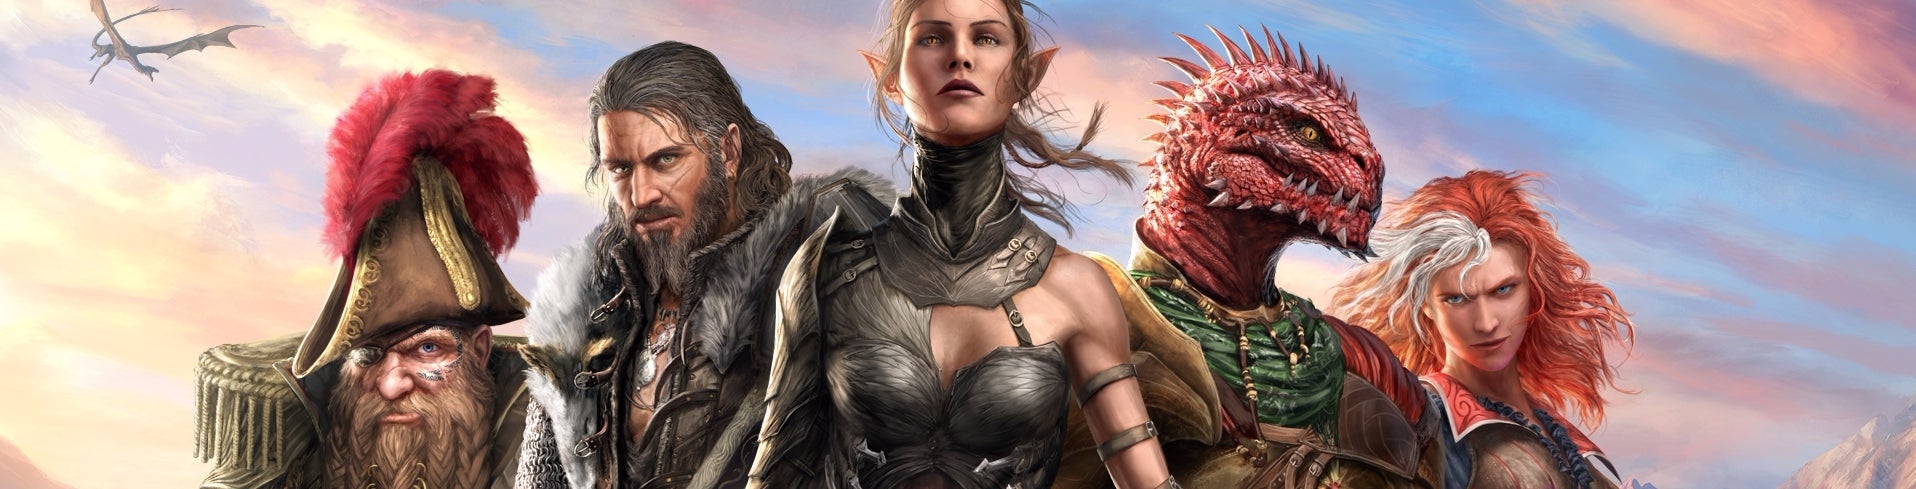 Image for Divinity: Original Sin 2 is shaping up to be every bit as good as its predecessor